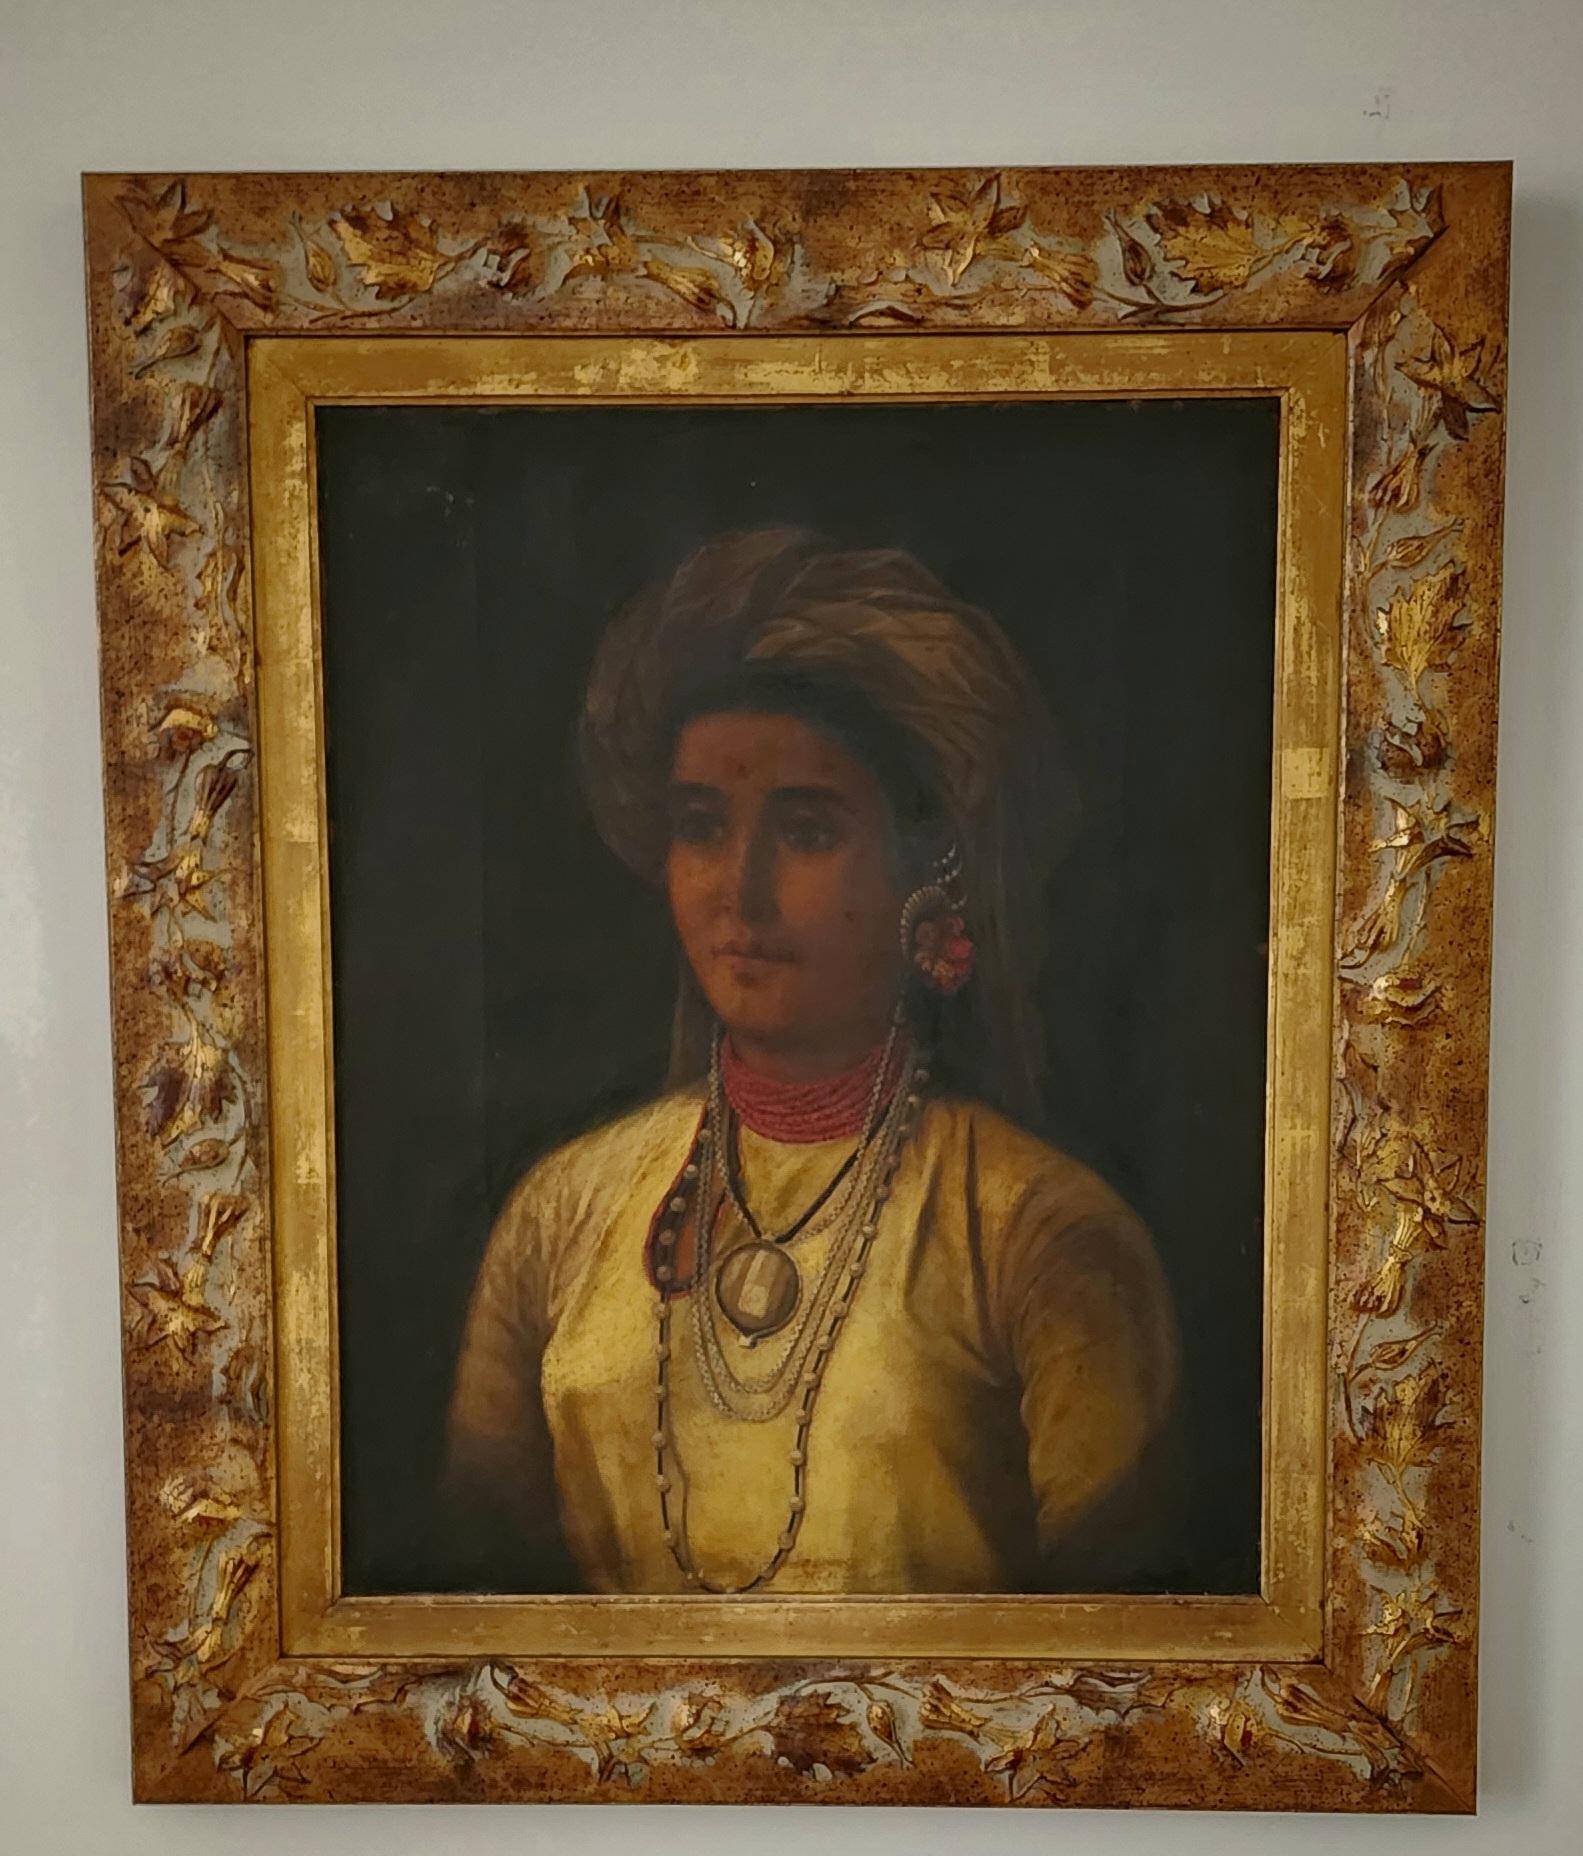 PORTRAIT OF AN INDIAN  NOBLE  WOMAN 19TH C , OIL ON CANVAS, RESTORED, FRAMED - Realist Painting by 19th Century Orientalist School 